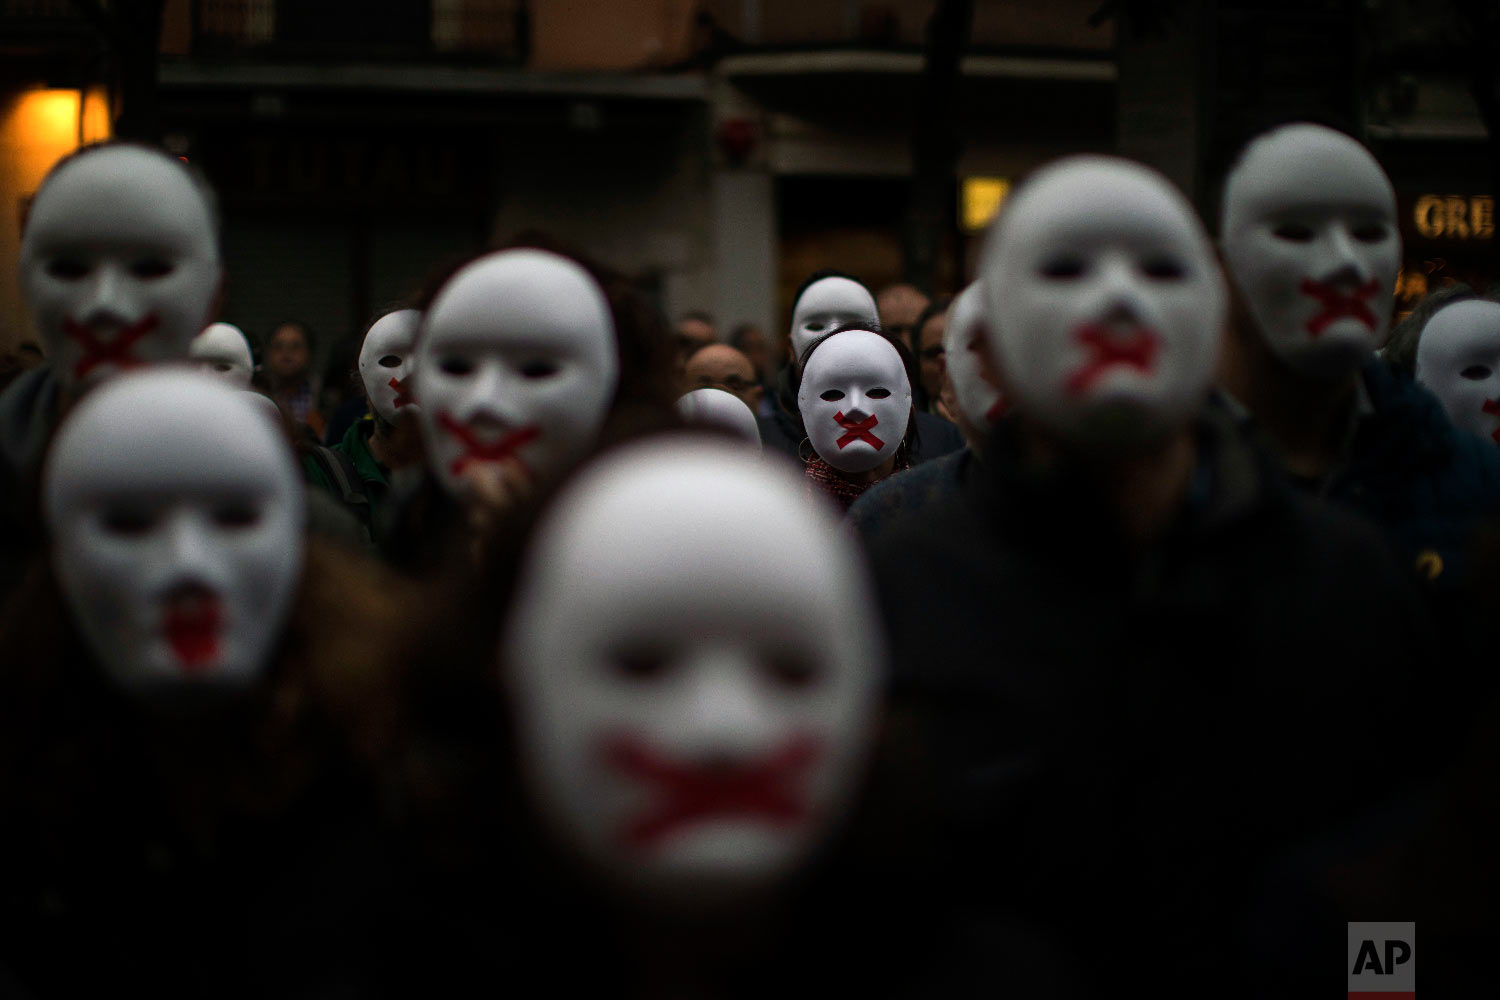  People wear white masks in support of Catalonian politicians jailed on charges of sedition and condemning the arrest of Catalonia's former president, Carles Puigdemont, in Germany, during a protest in Figures, Spain on April. 5, 2018. (AP Photo/Emil